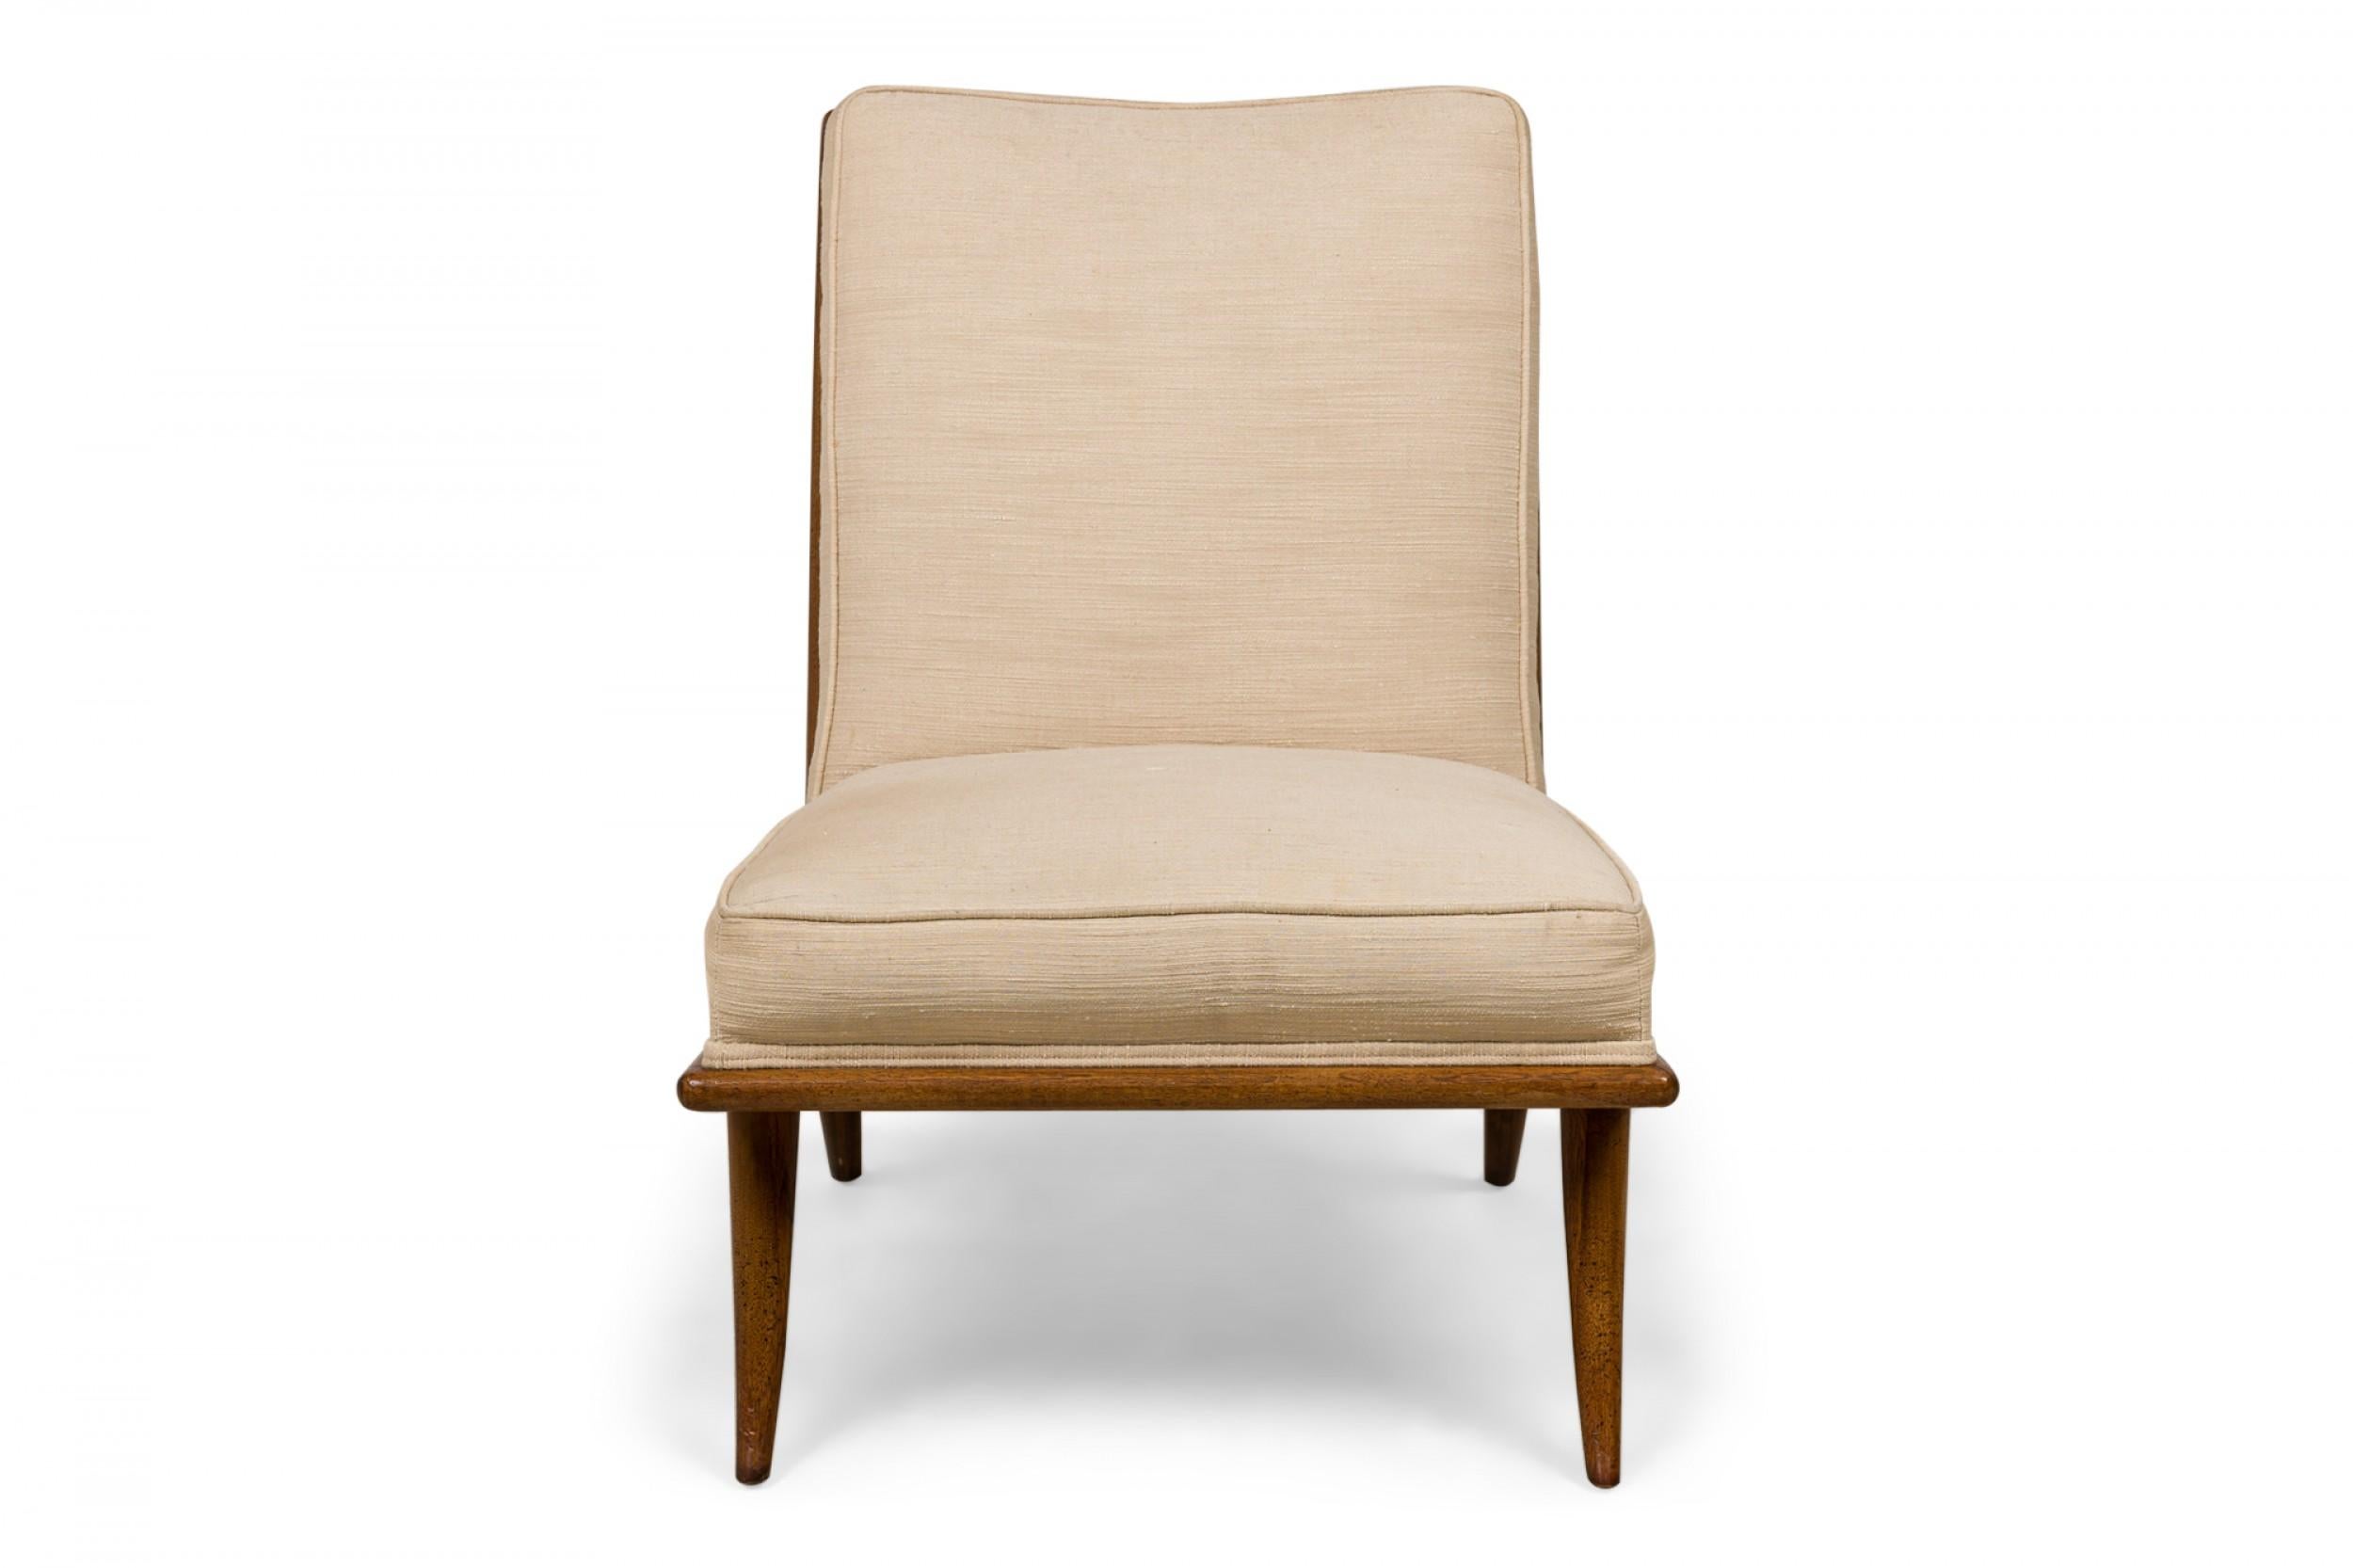 Mid-Century slipper / side chair with beige fabric upholstery and a walnut frame resting on four gently curved and tapered legs. (T.H. ROBSJOHN-GIBBINGS FOR WIDDICOMB)(Similar pieces: DUF0545, DUF0546)
